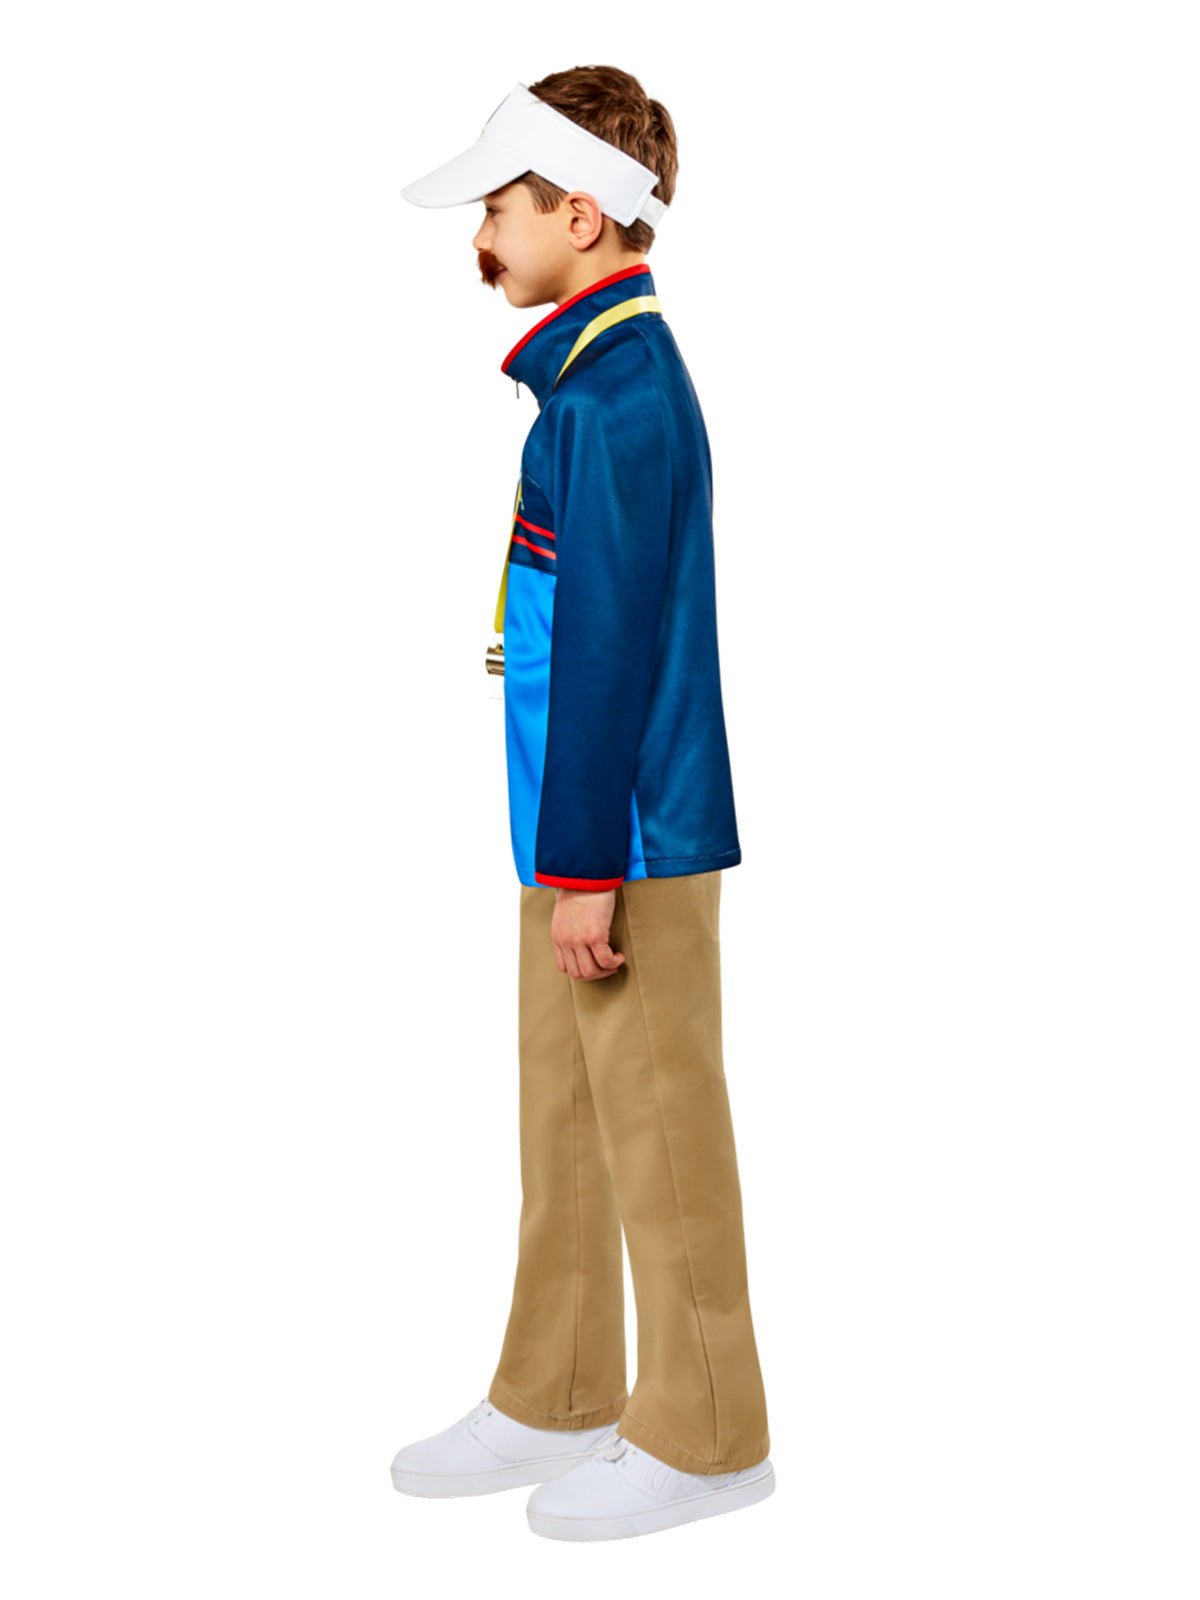 Transform into the Soccer Coach with Ted Lasso Costume